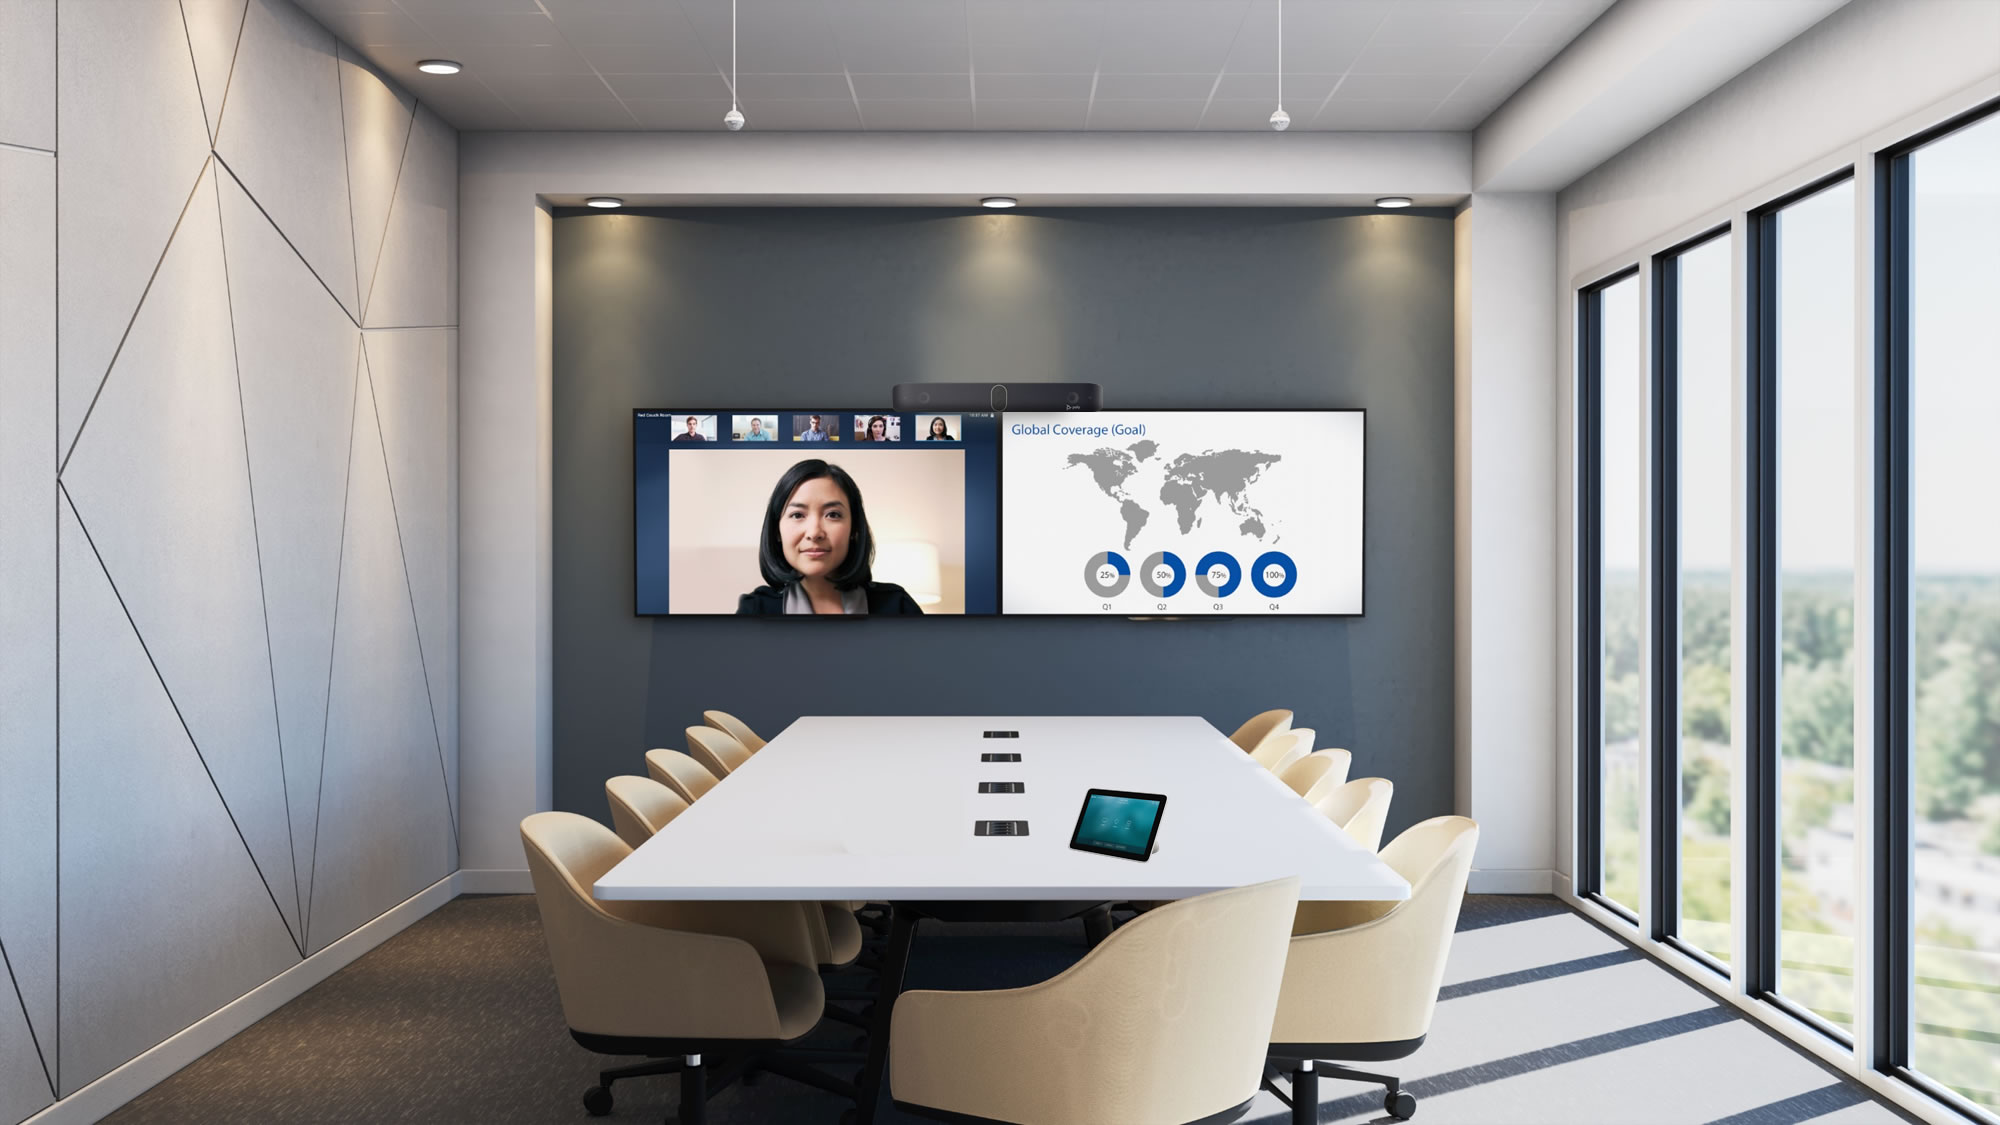 Meeting room with dual front of room displays and all-in-one videoconferencing solution